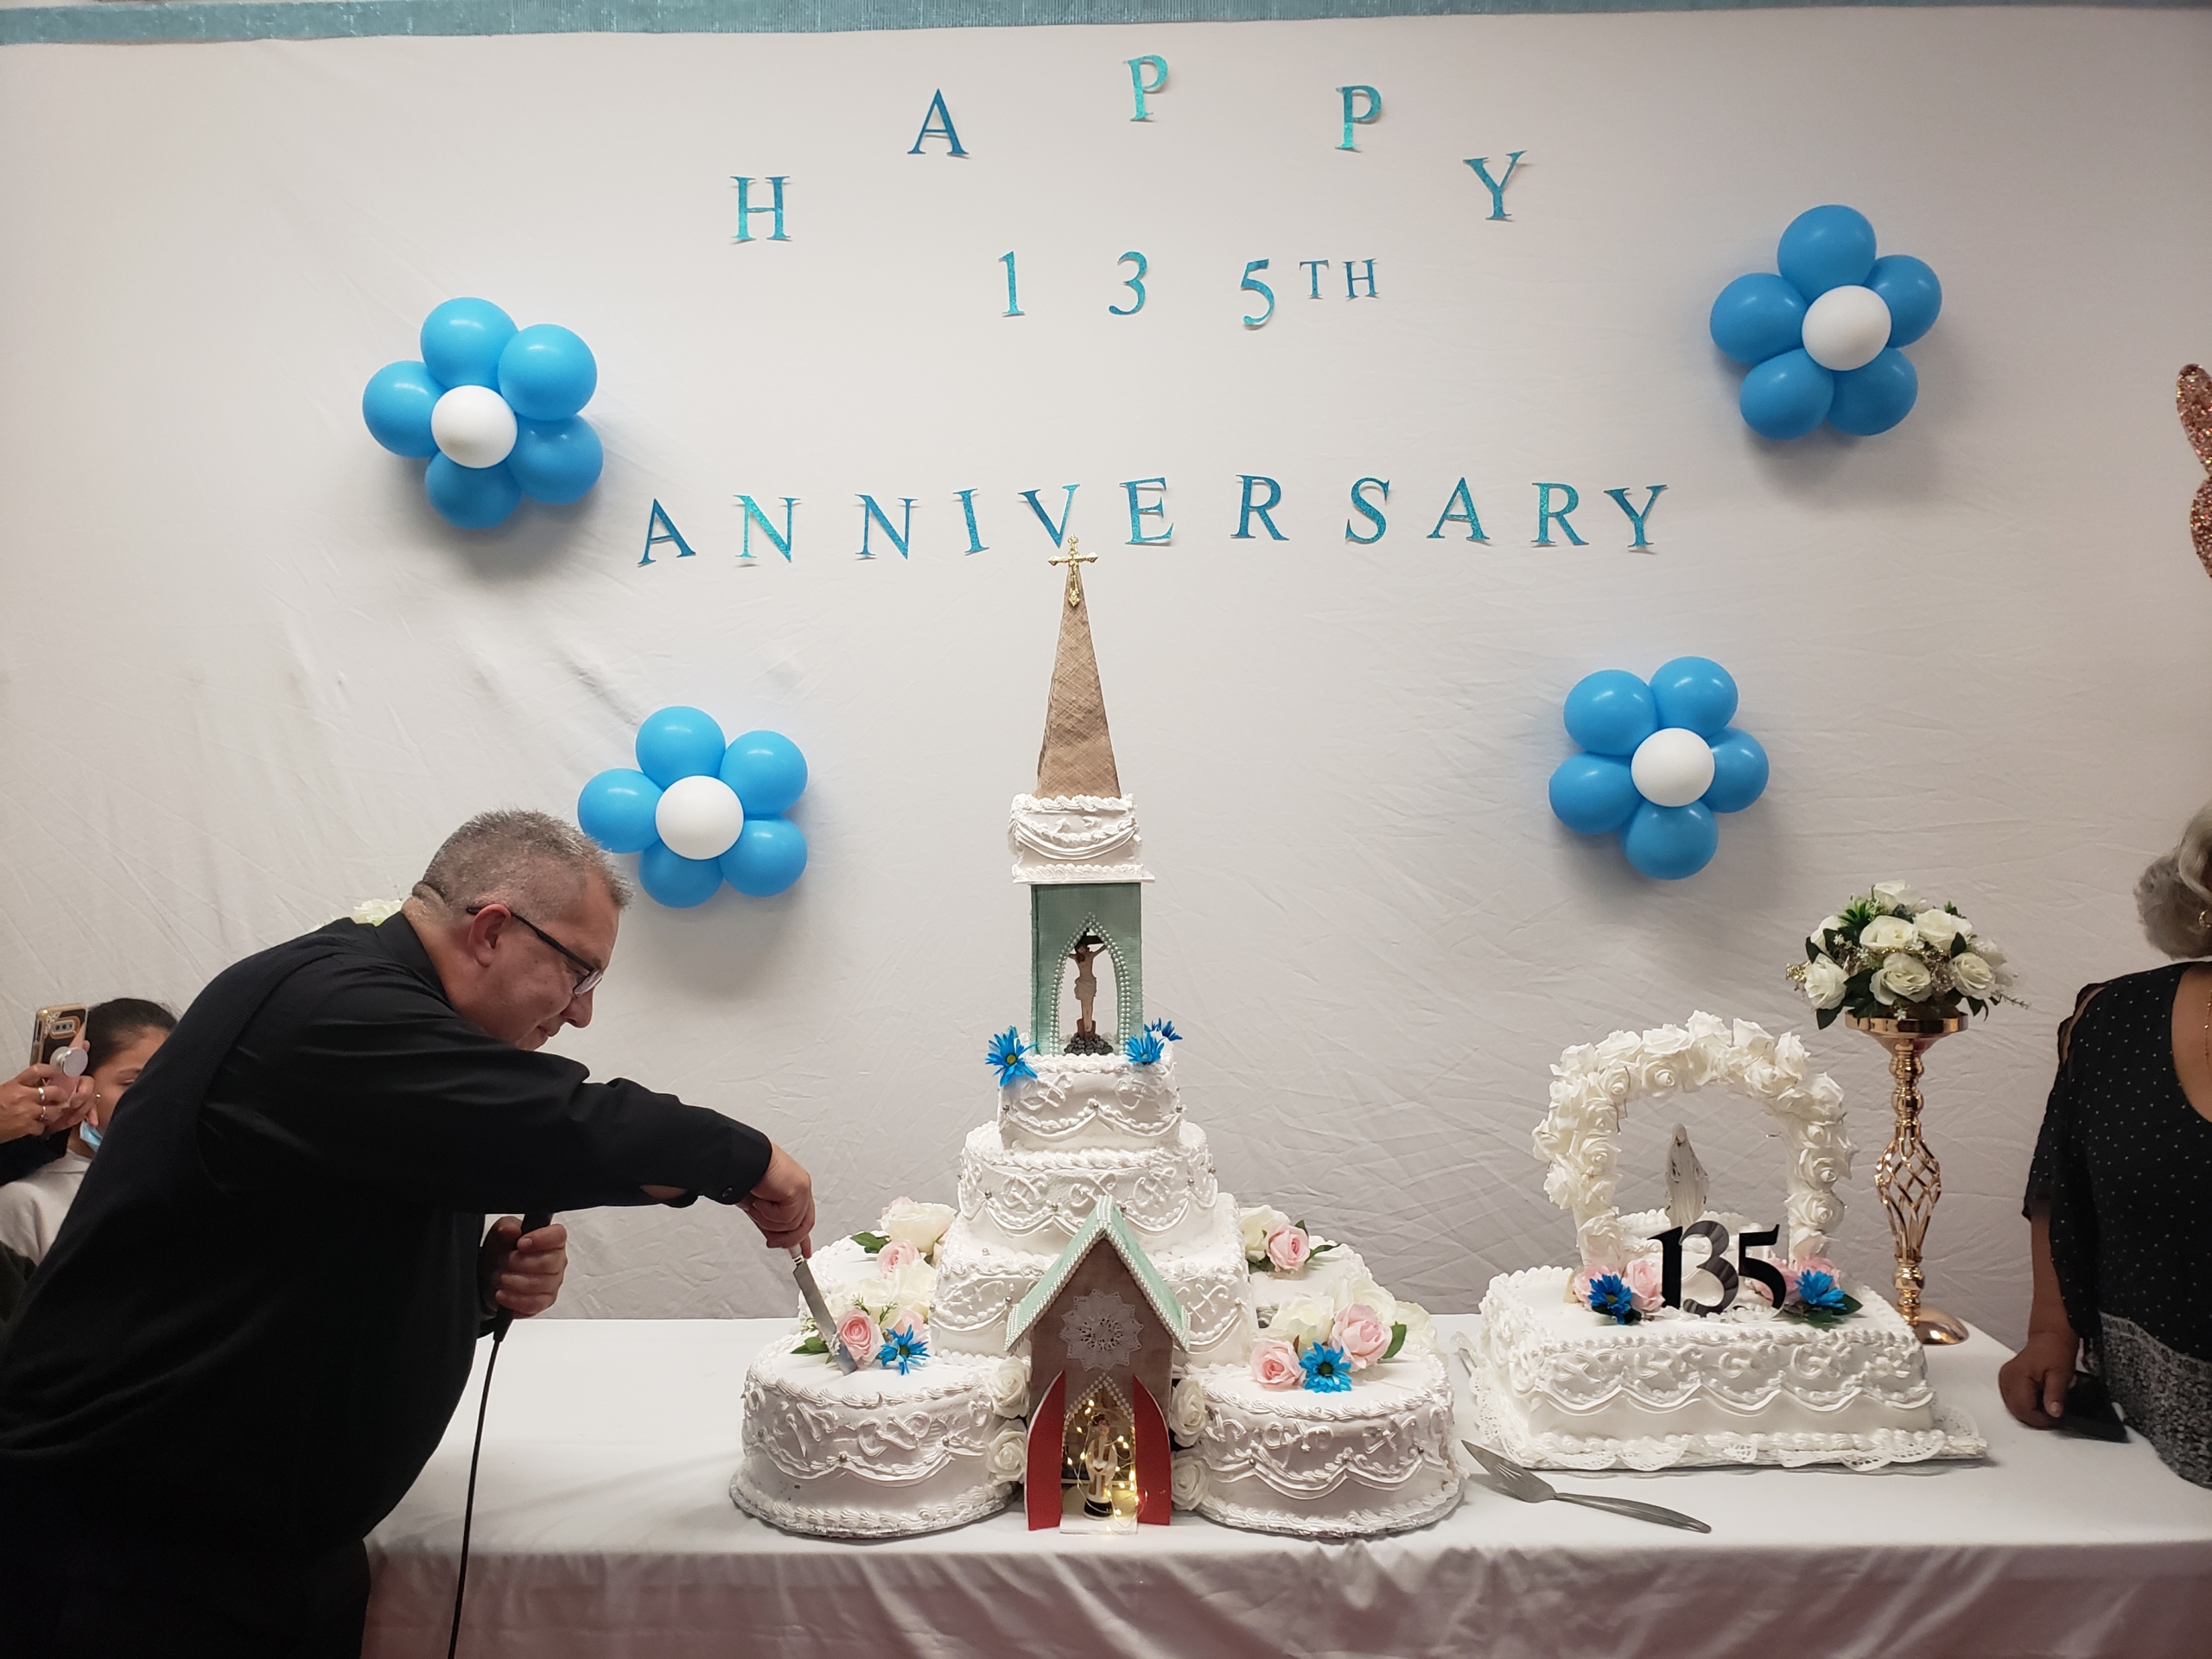 A man cutting a cake on top of a table.